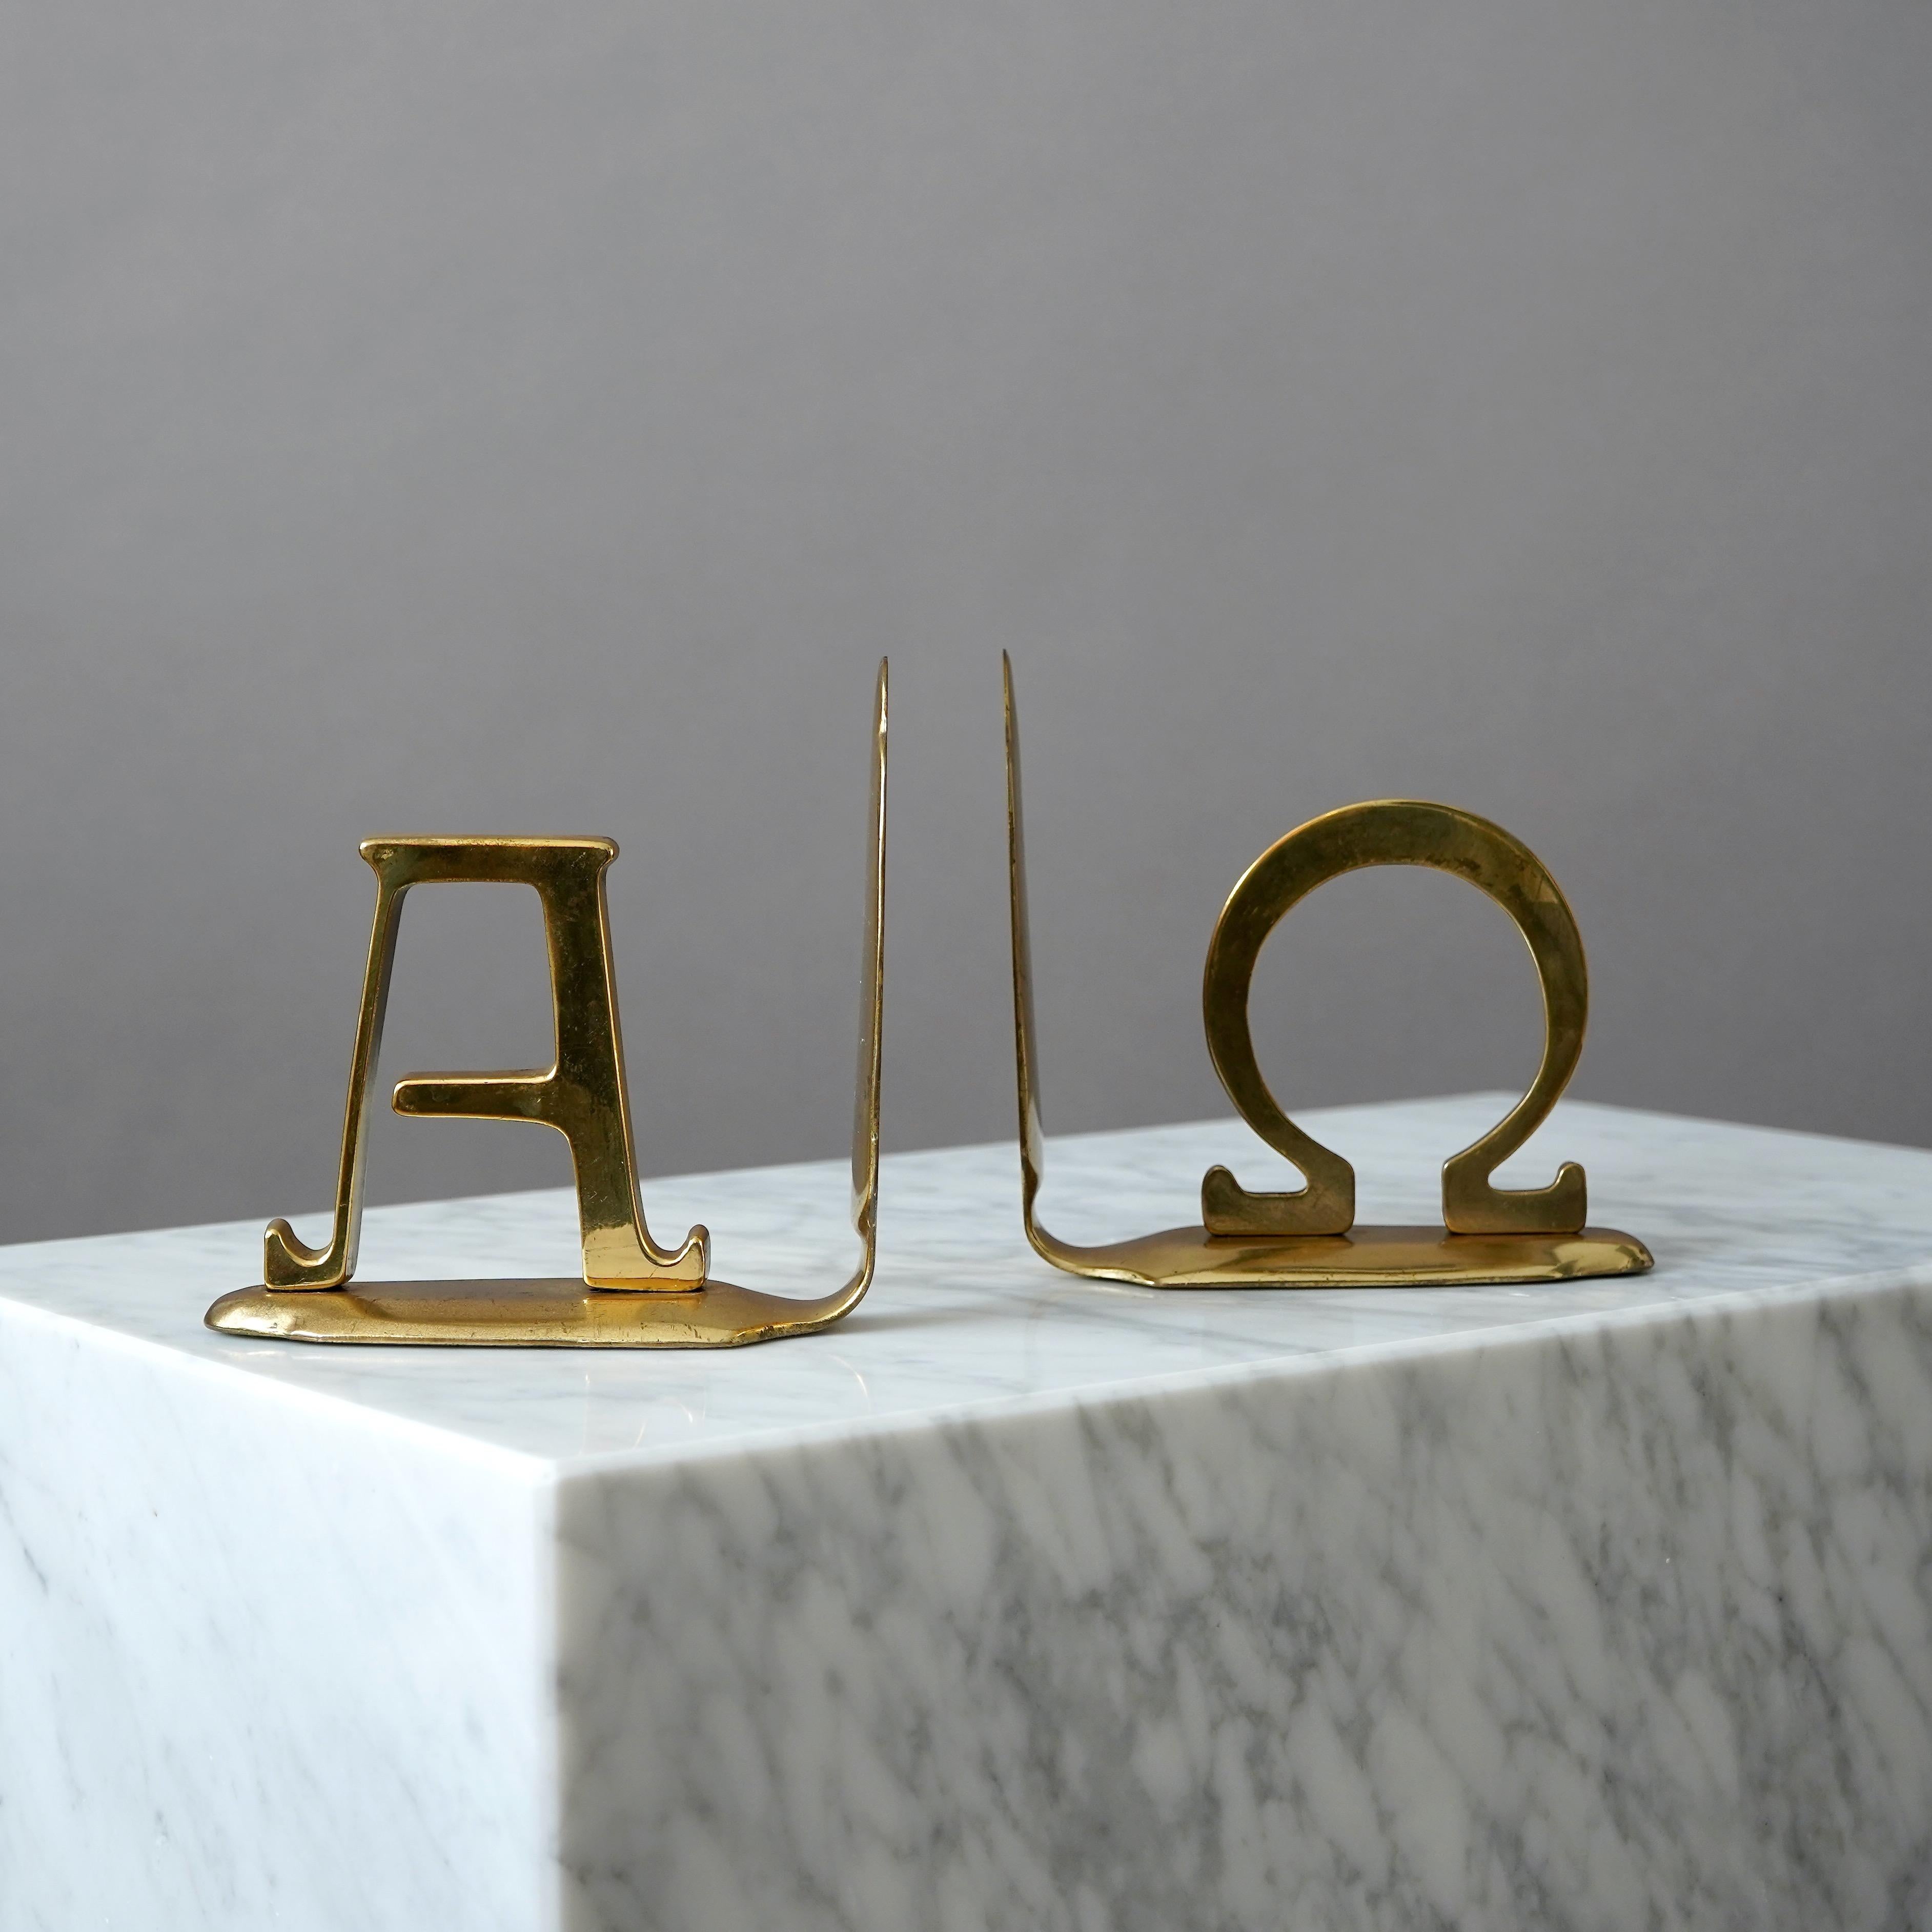 20th Century Pair of Alpha and Omega Brass Bookends, Germany, 1960s For Sale